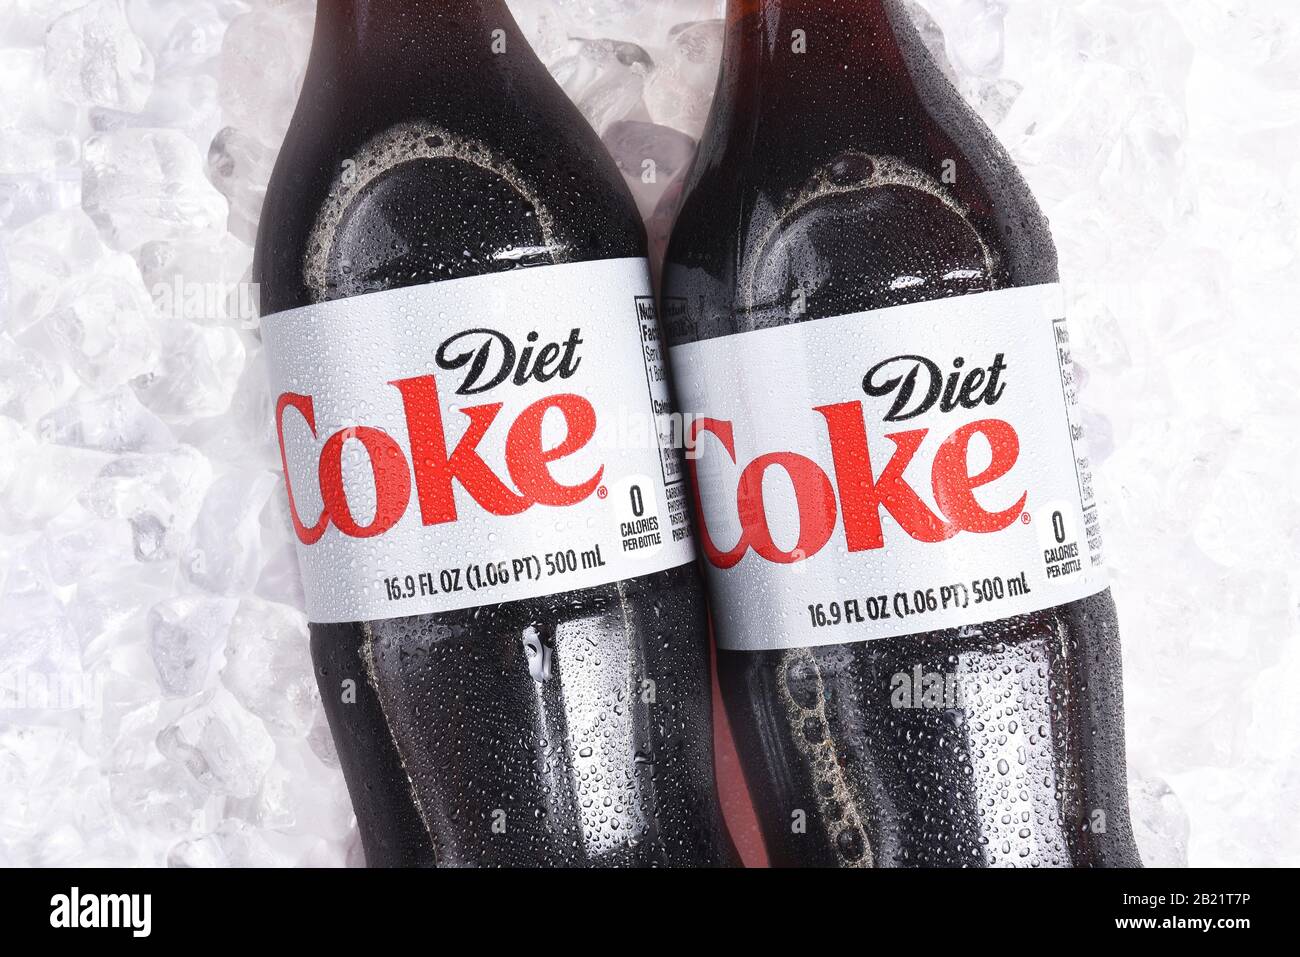 IRVINE, CALIFORNIA - January 22, 2017: 3 bottles of Diet Coke on ice. Coca-Cola is the one of the worlds favorite carbonated beverages. Stock Photo